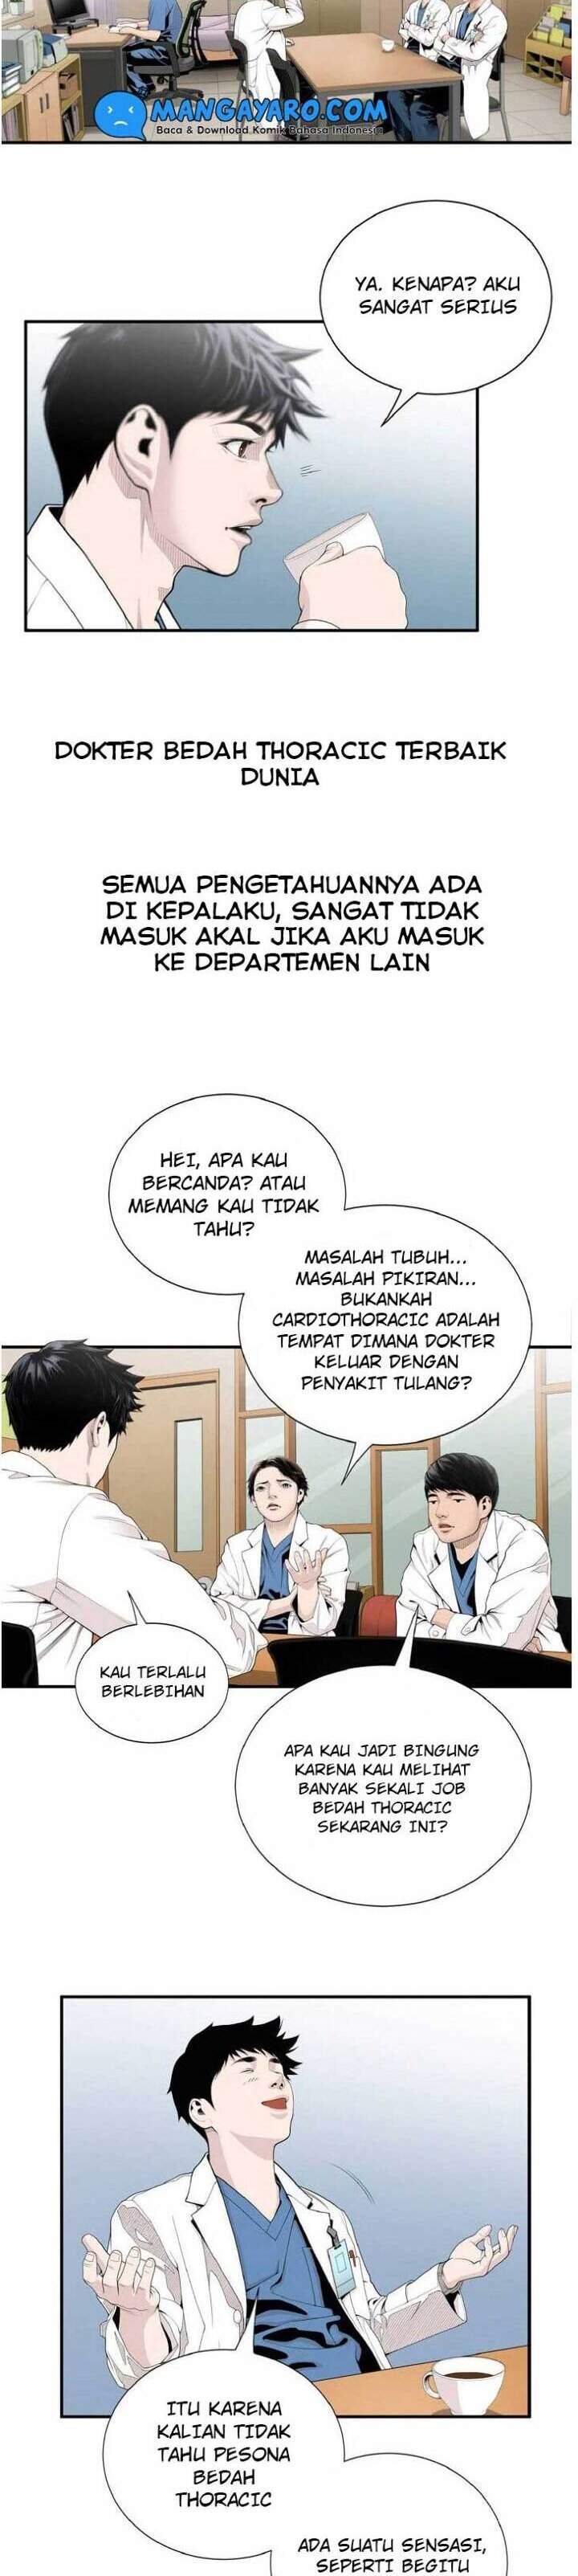 Dr. Choi Tae-Soo Chapter 8